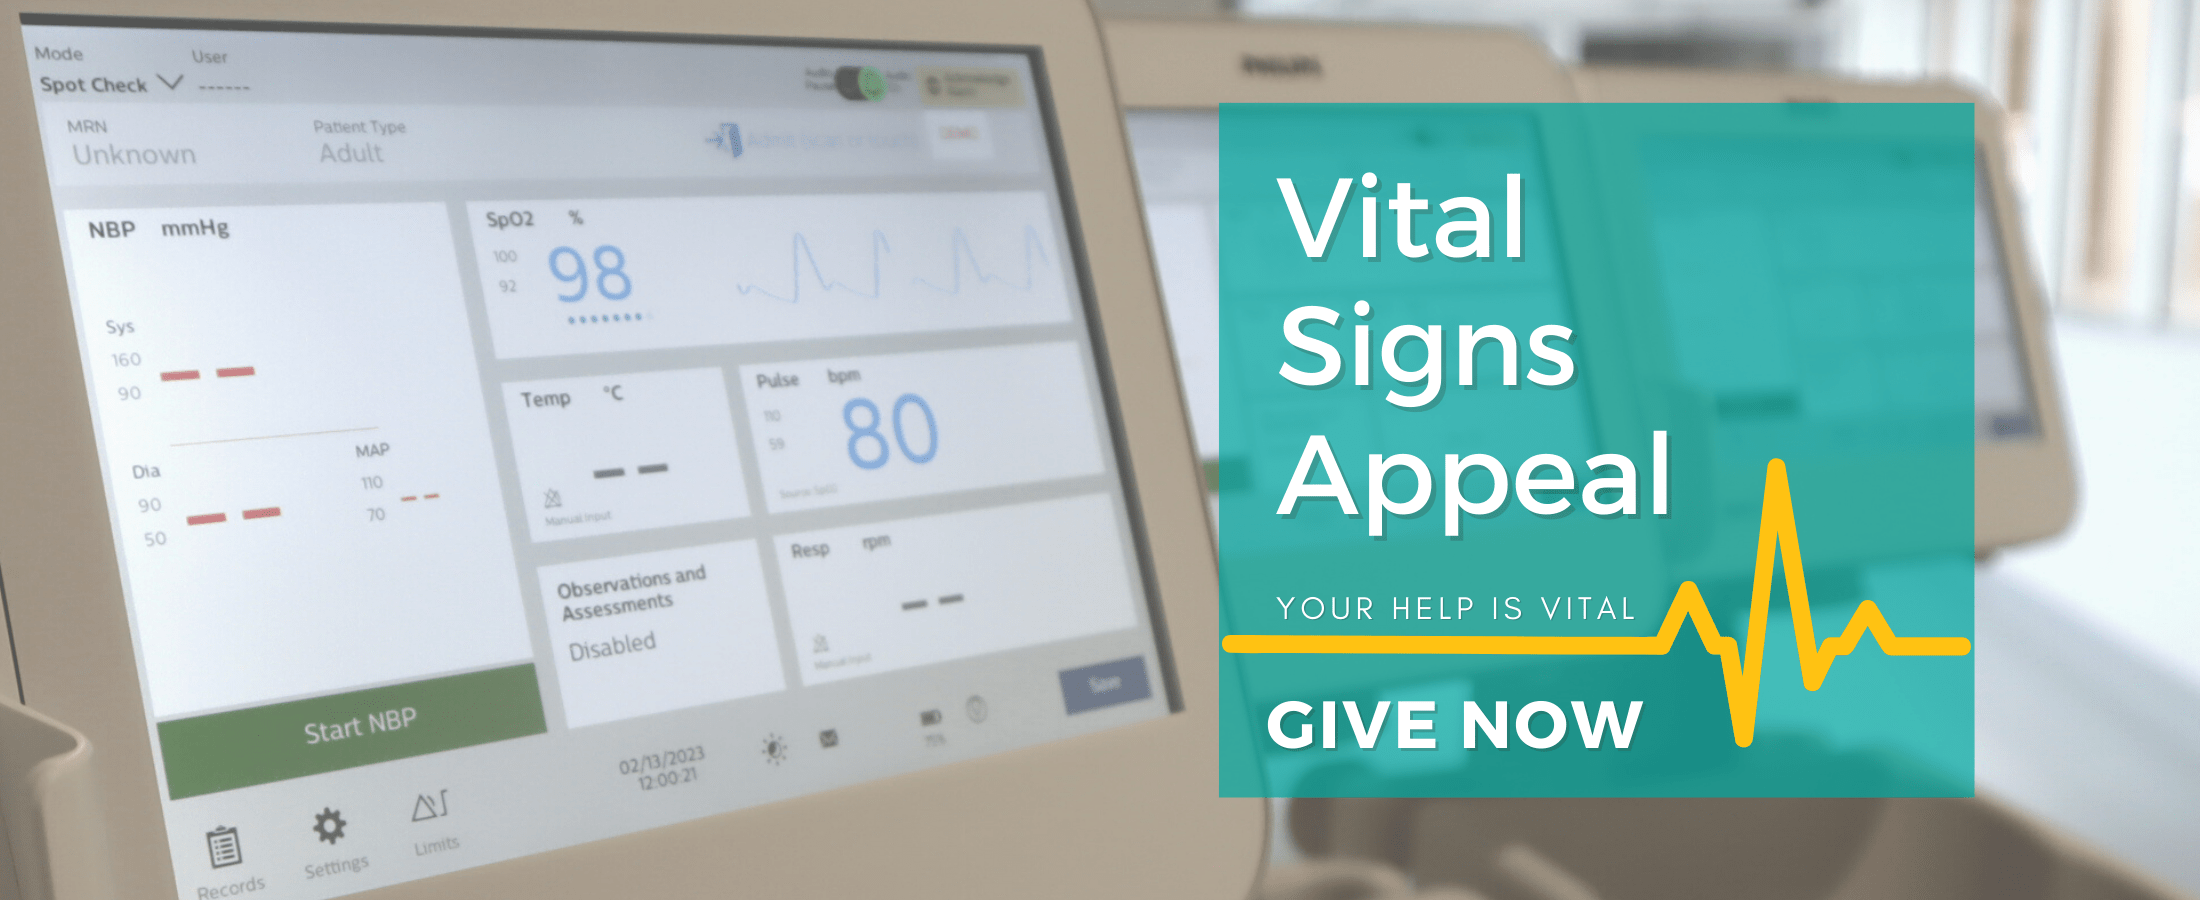 vital sign monitors in a row with  with the wording Vital Signs Appeal